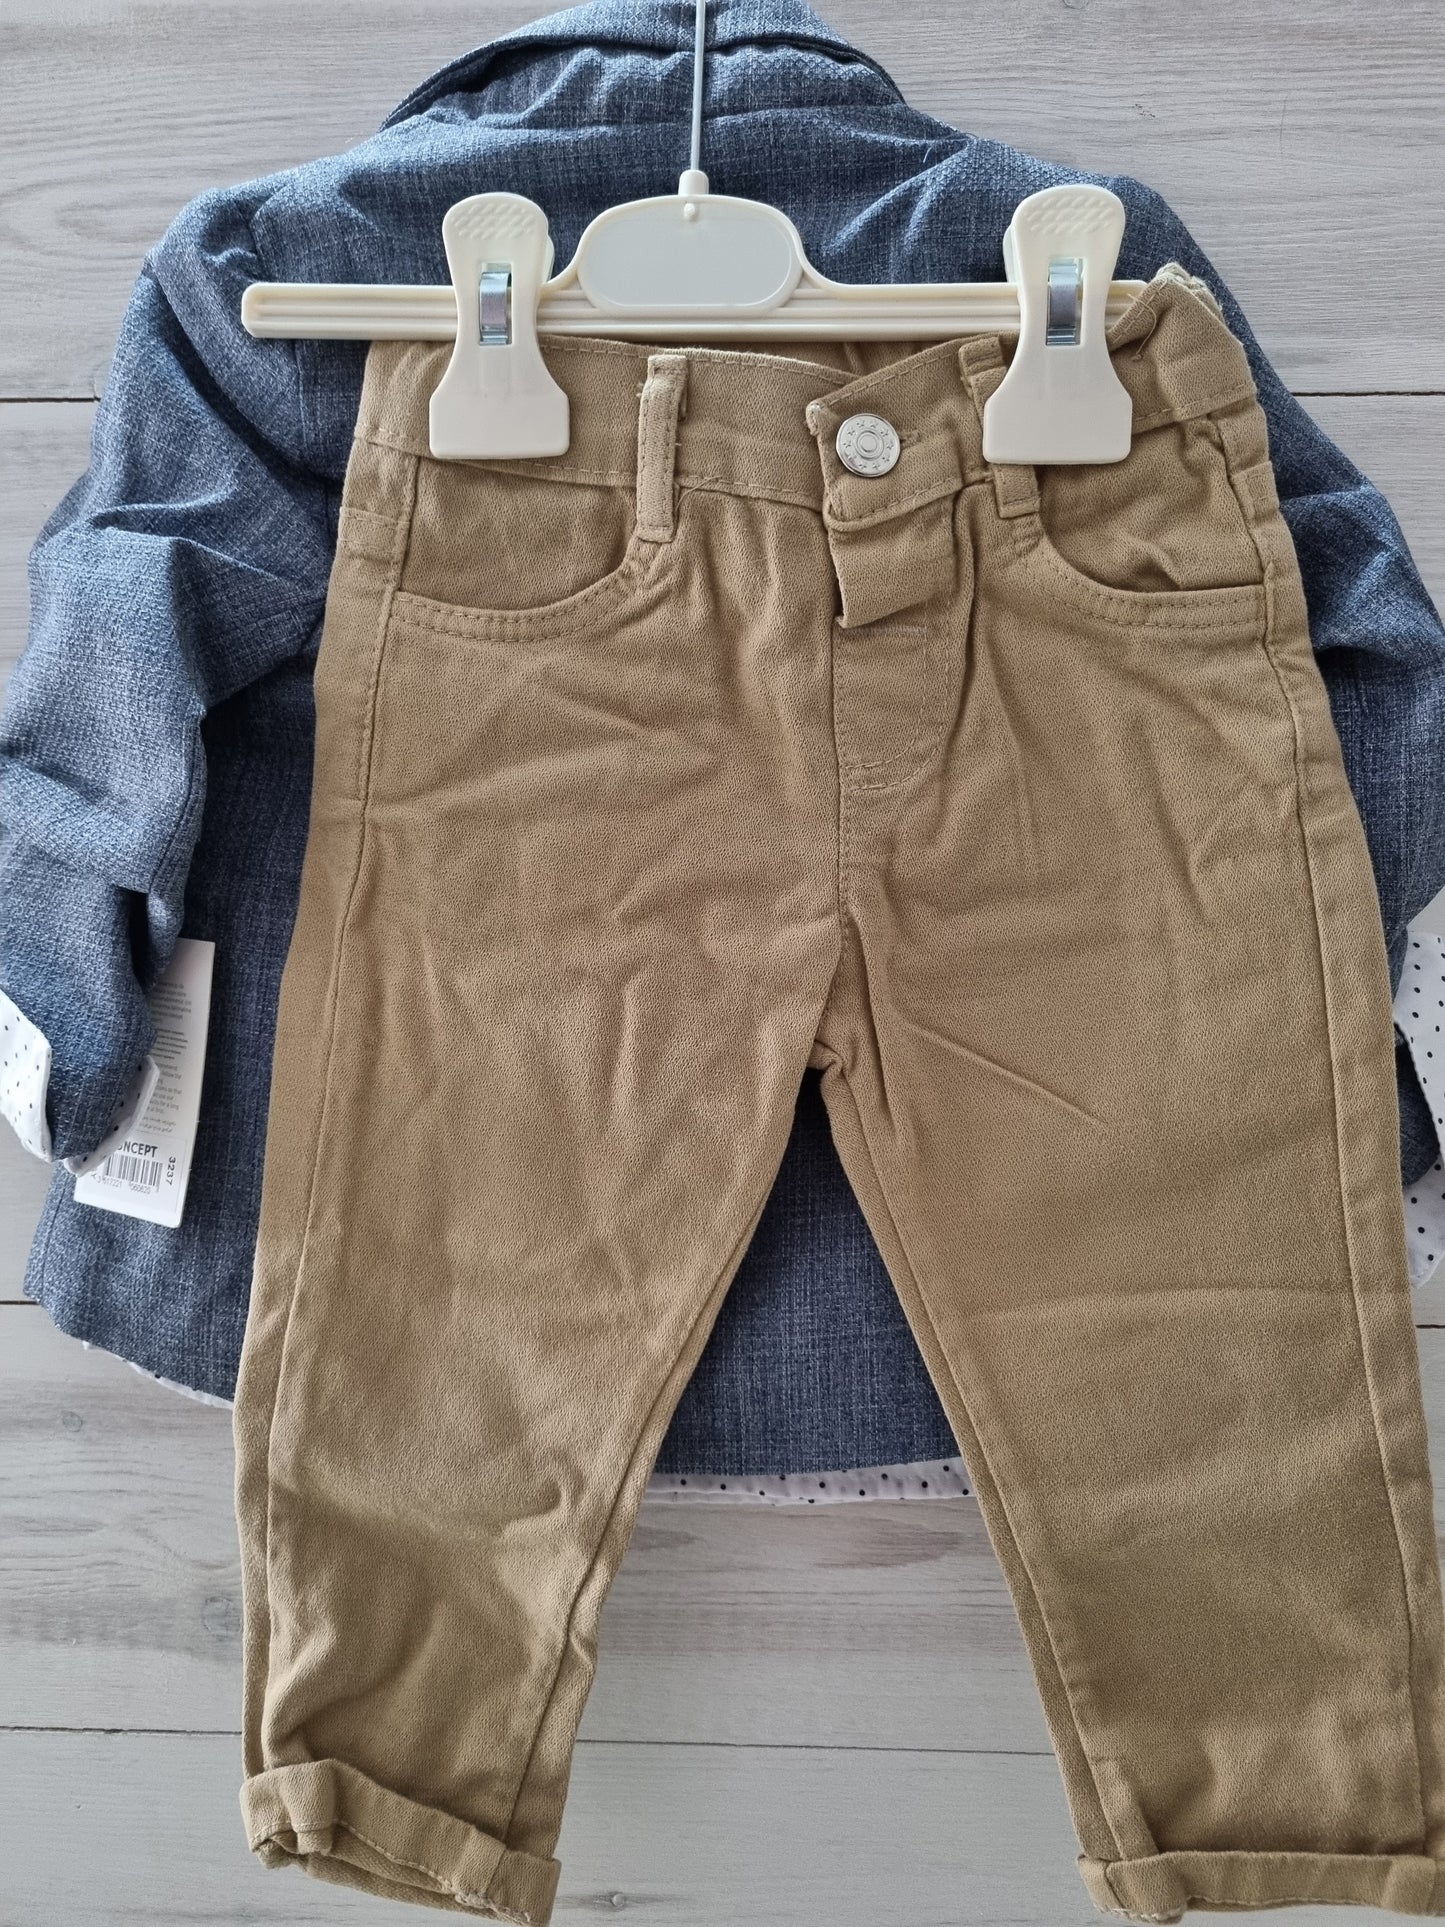 Baby Boy Long-sleeve Party Outfit